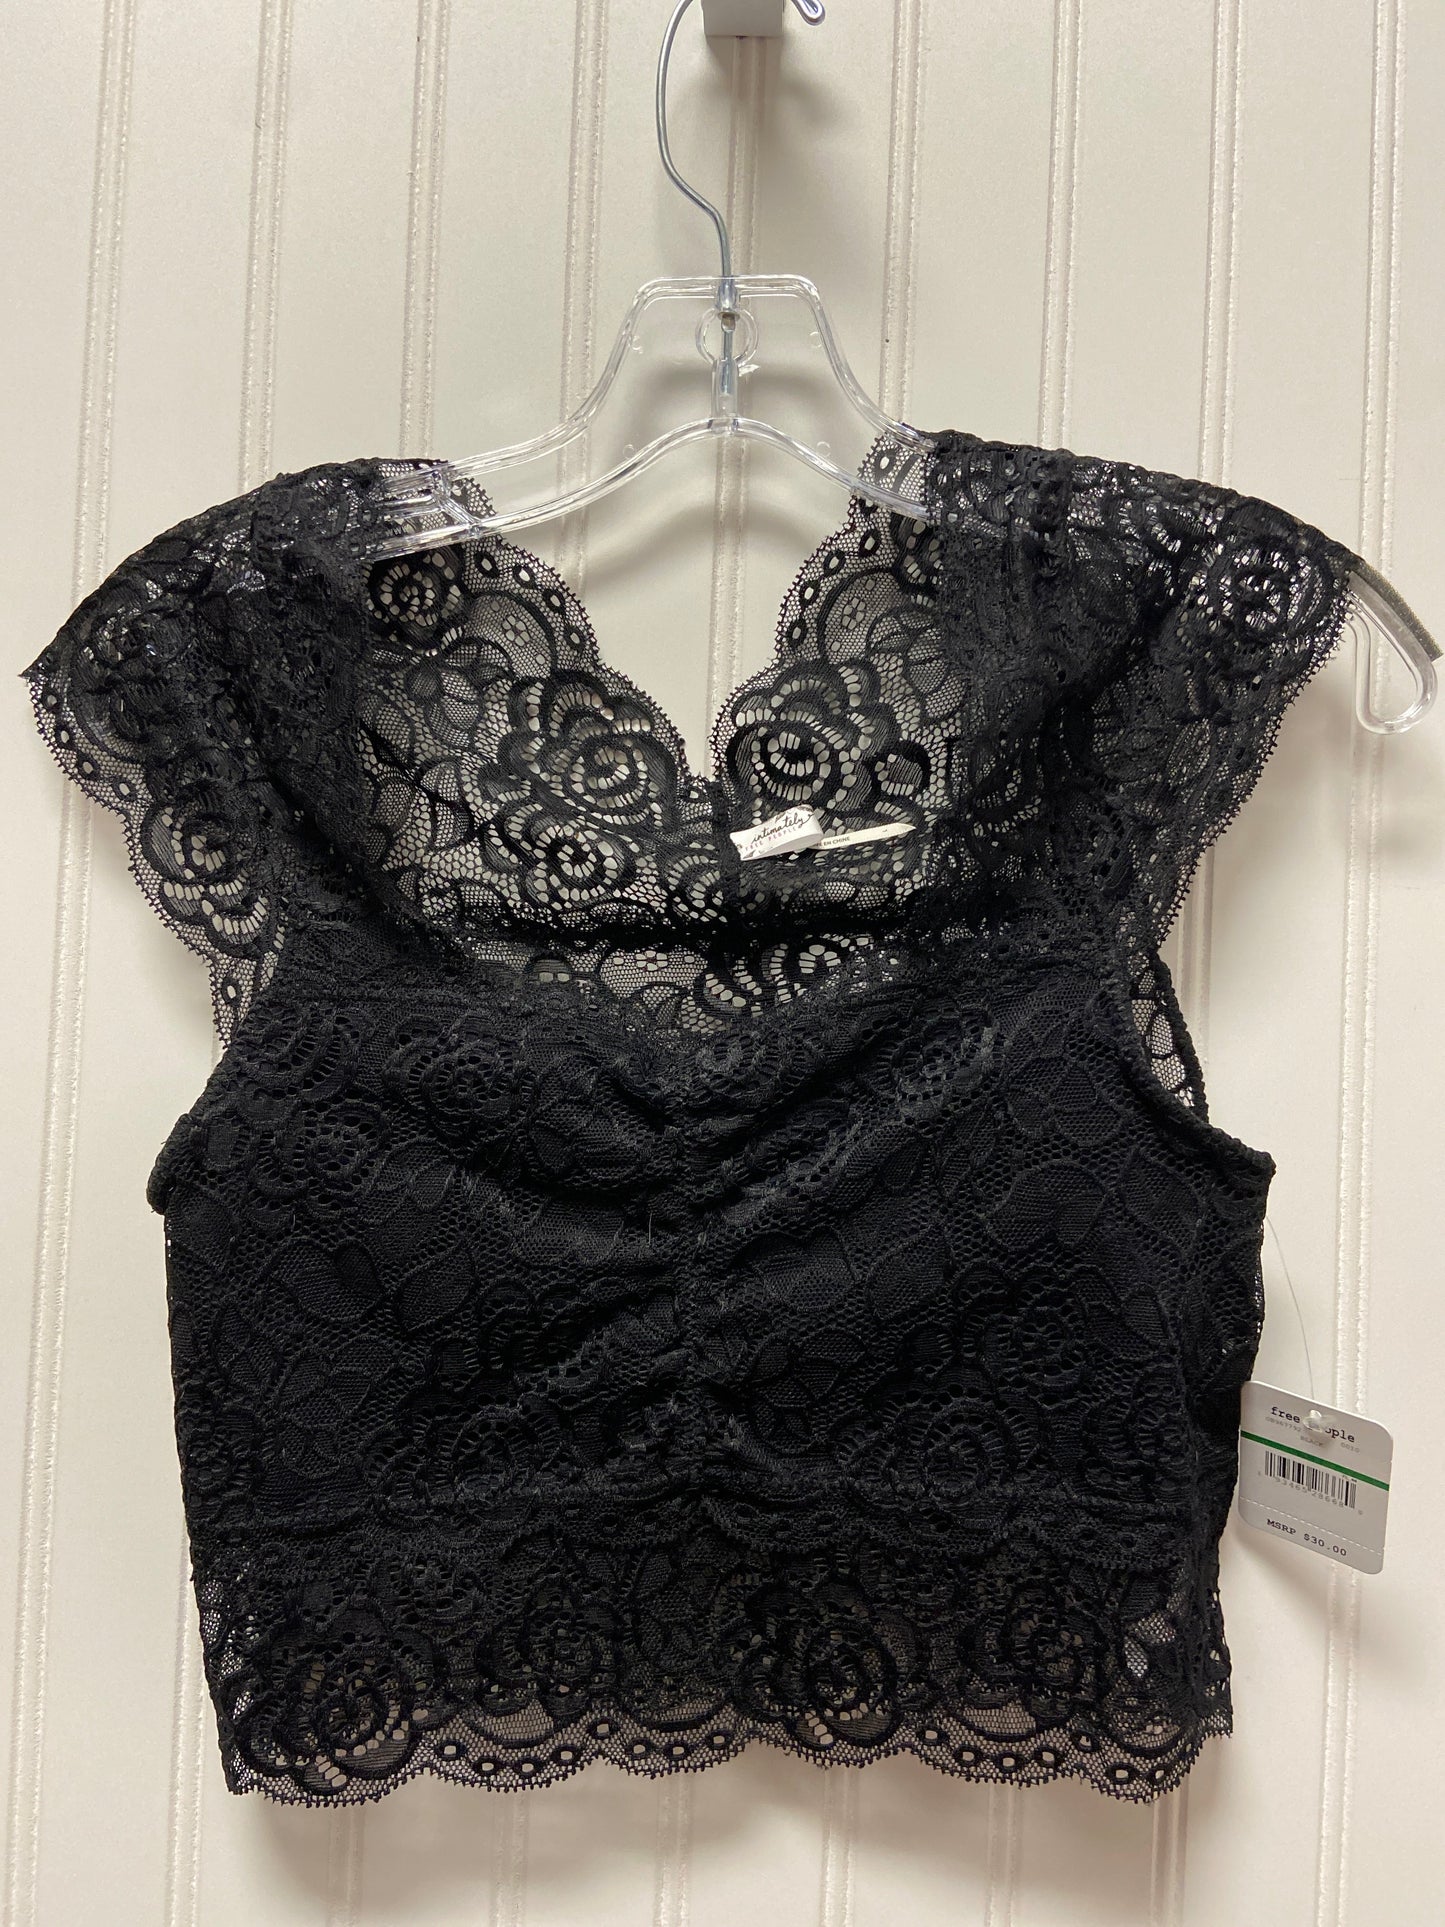 Black Top Cami Free People, Size L